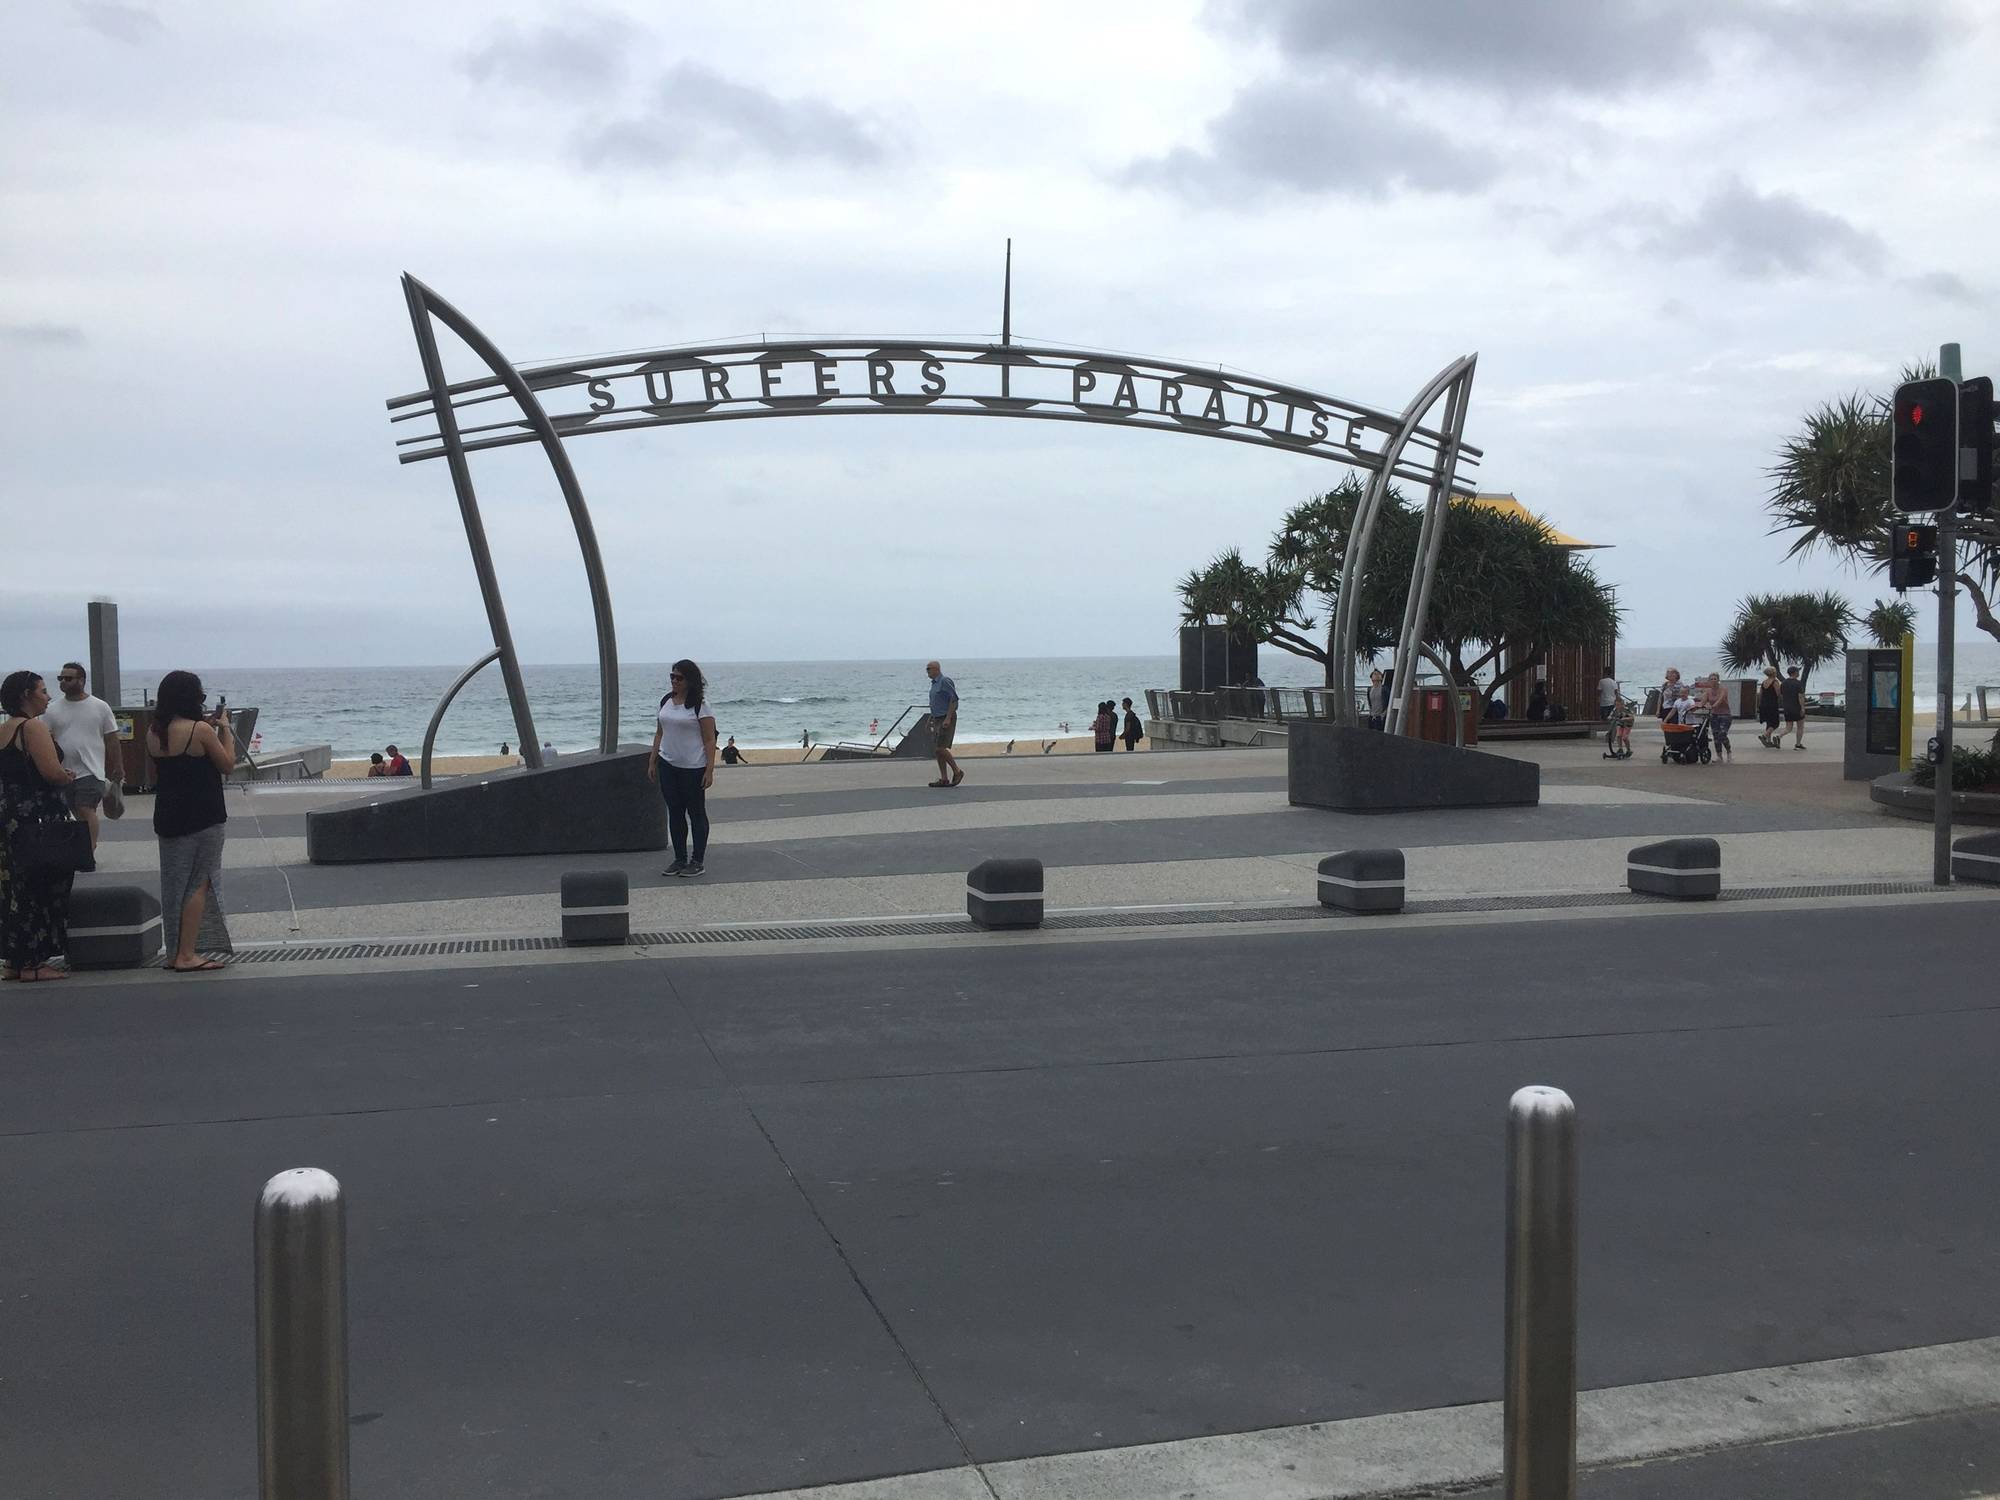 Main entrance to the beach in Surfers Paradise